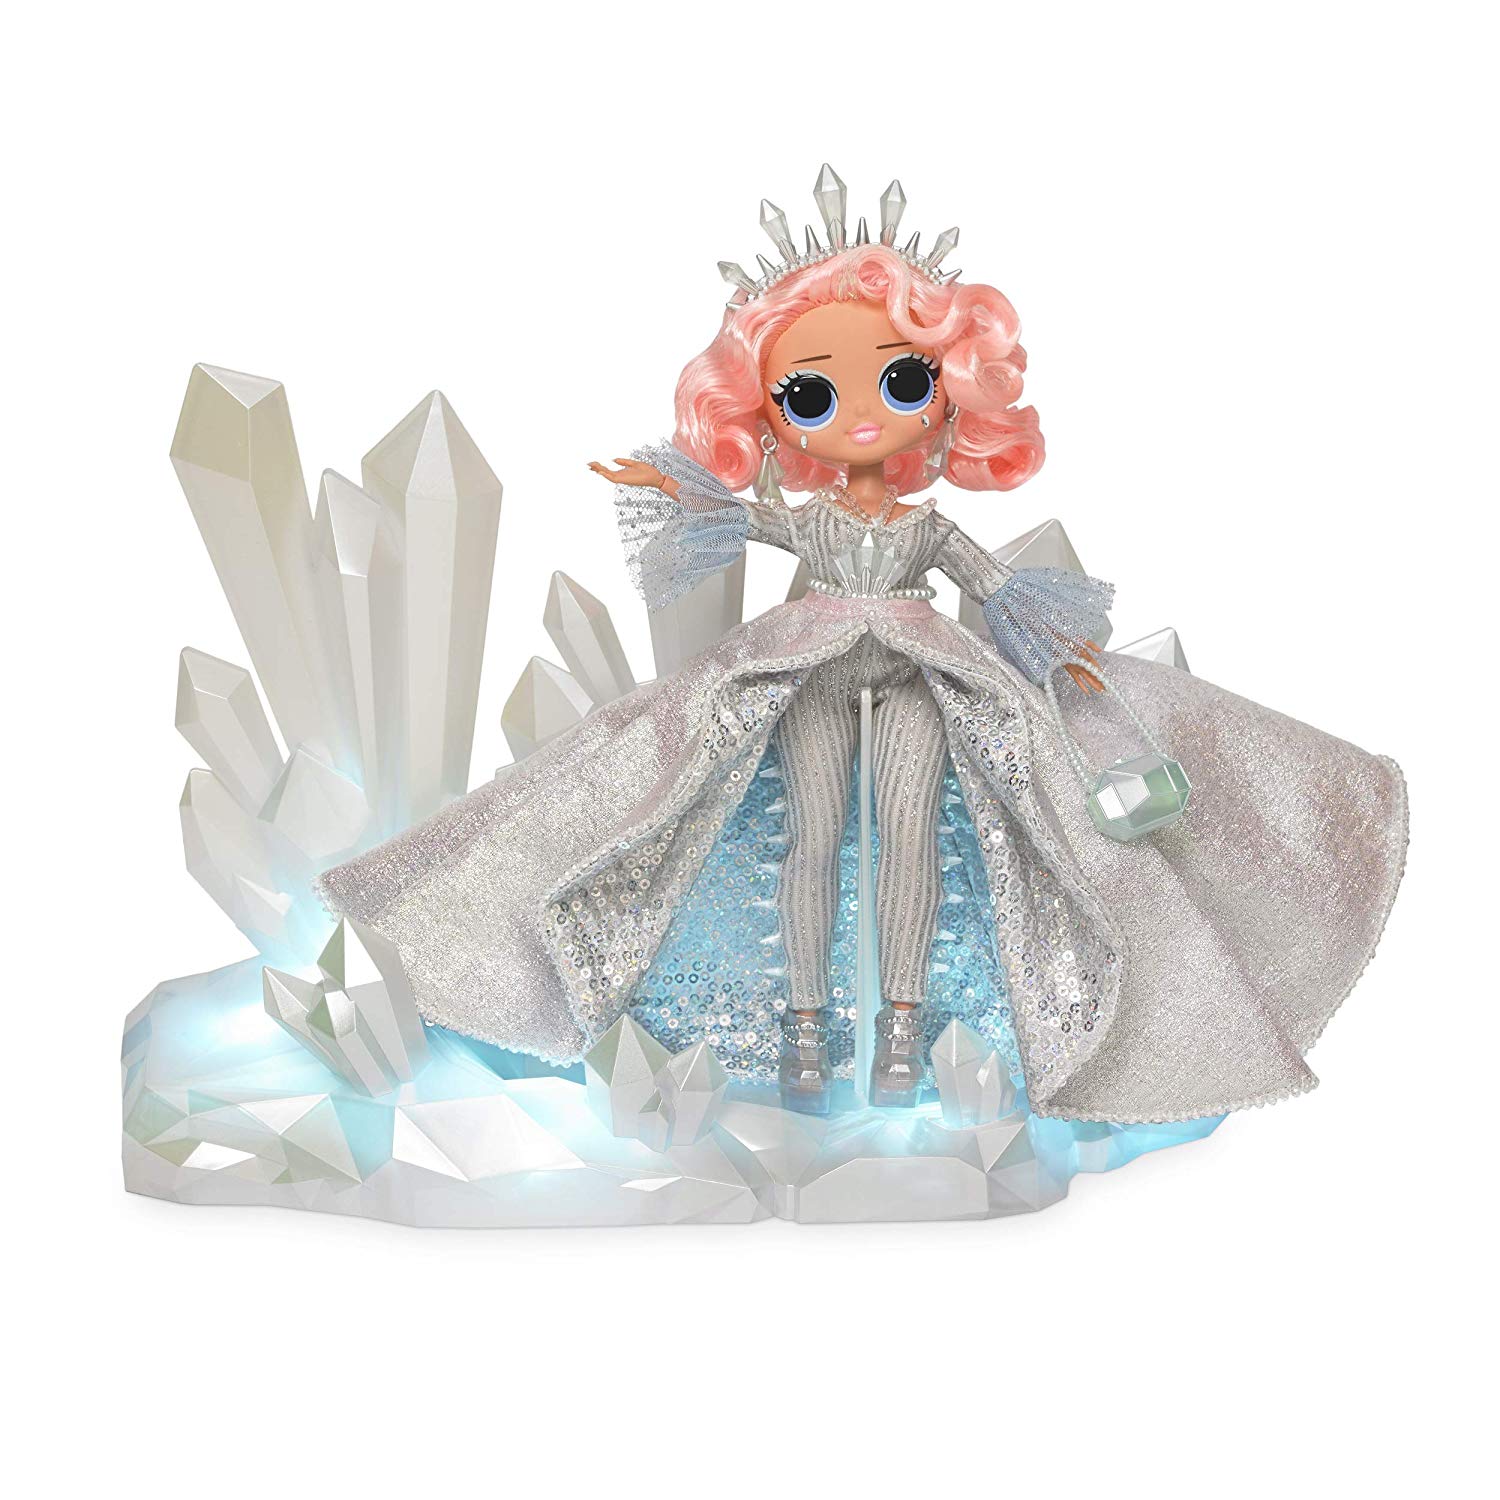 LOL Surprise! OMG Crystal Star 2019 Collector Edition Fashion Doll is